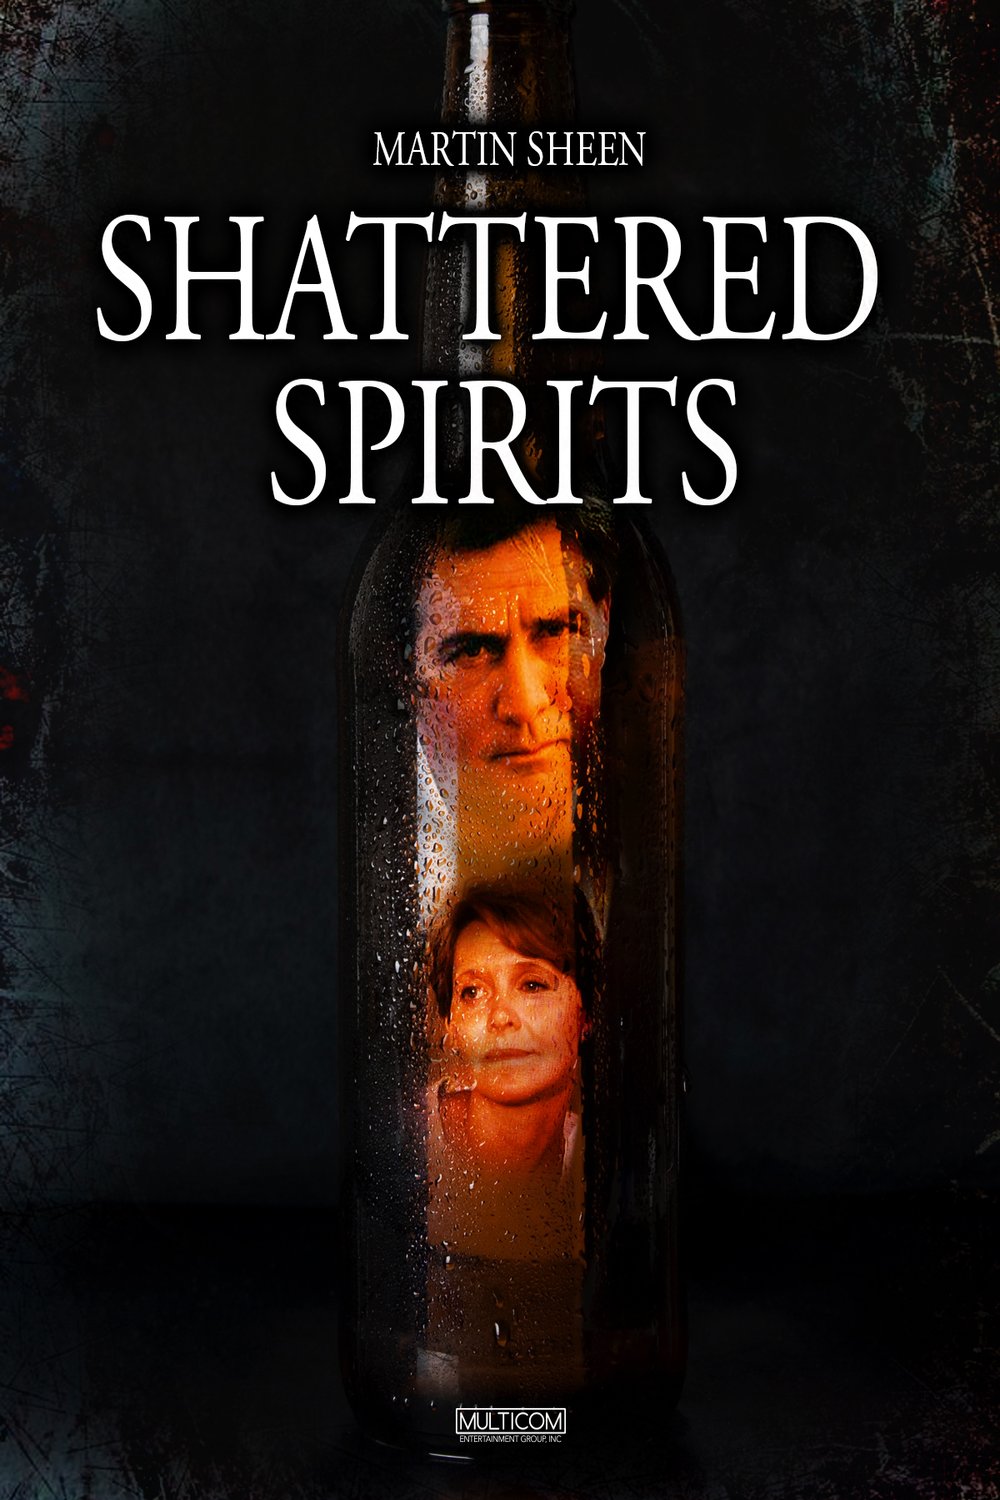 Poster of the movie Shattered Spirits